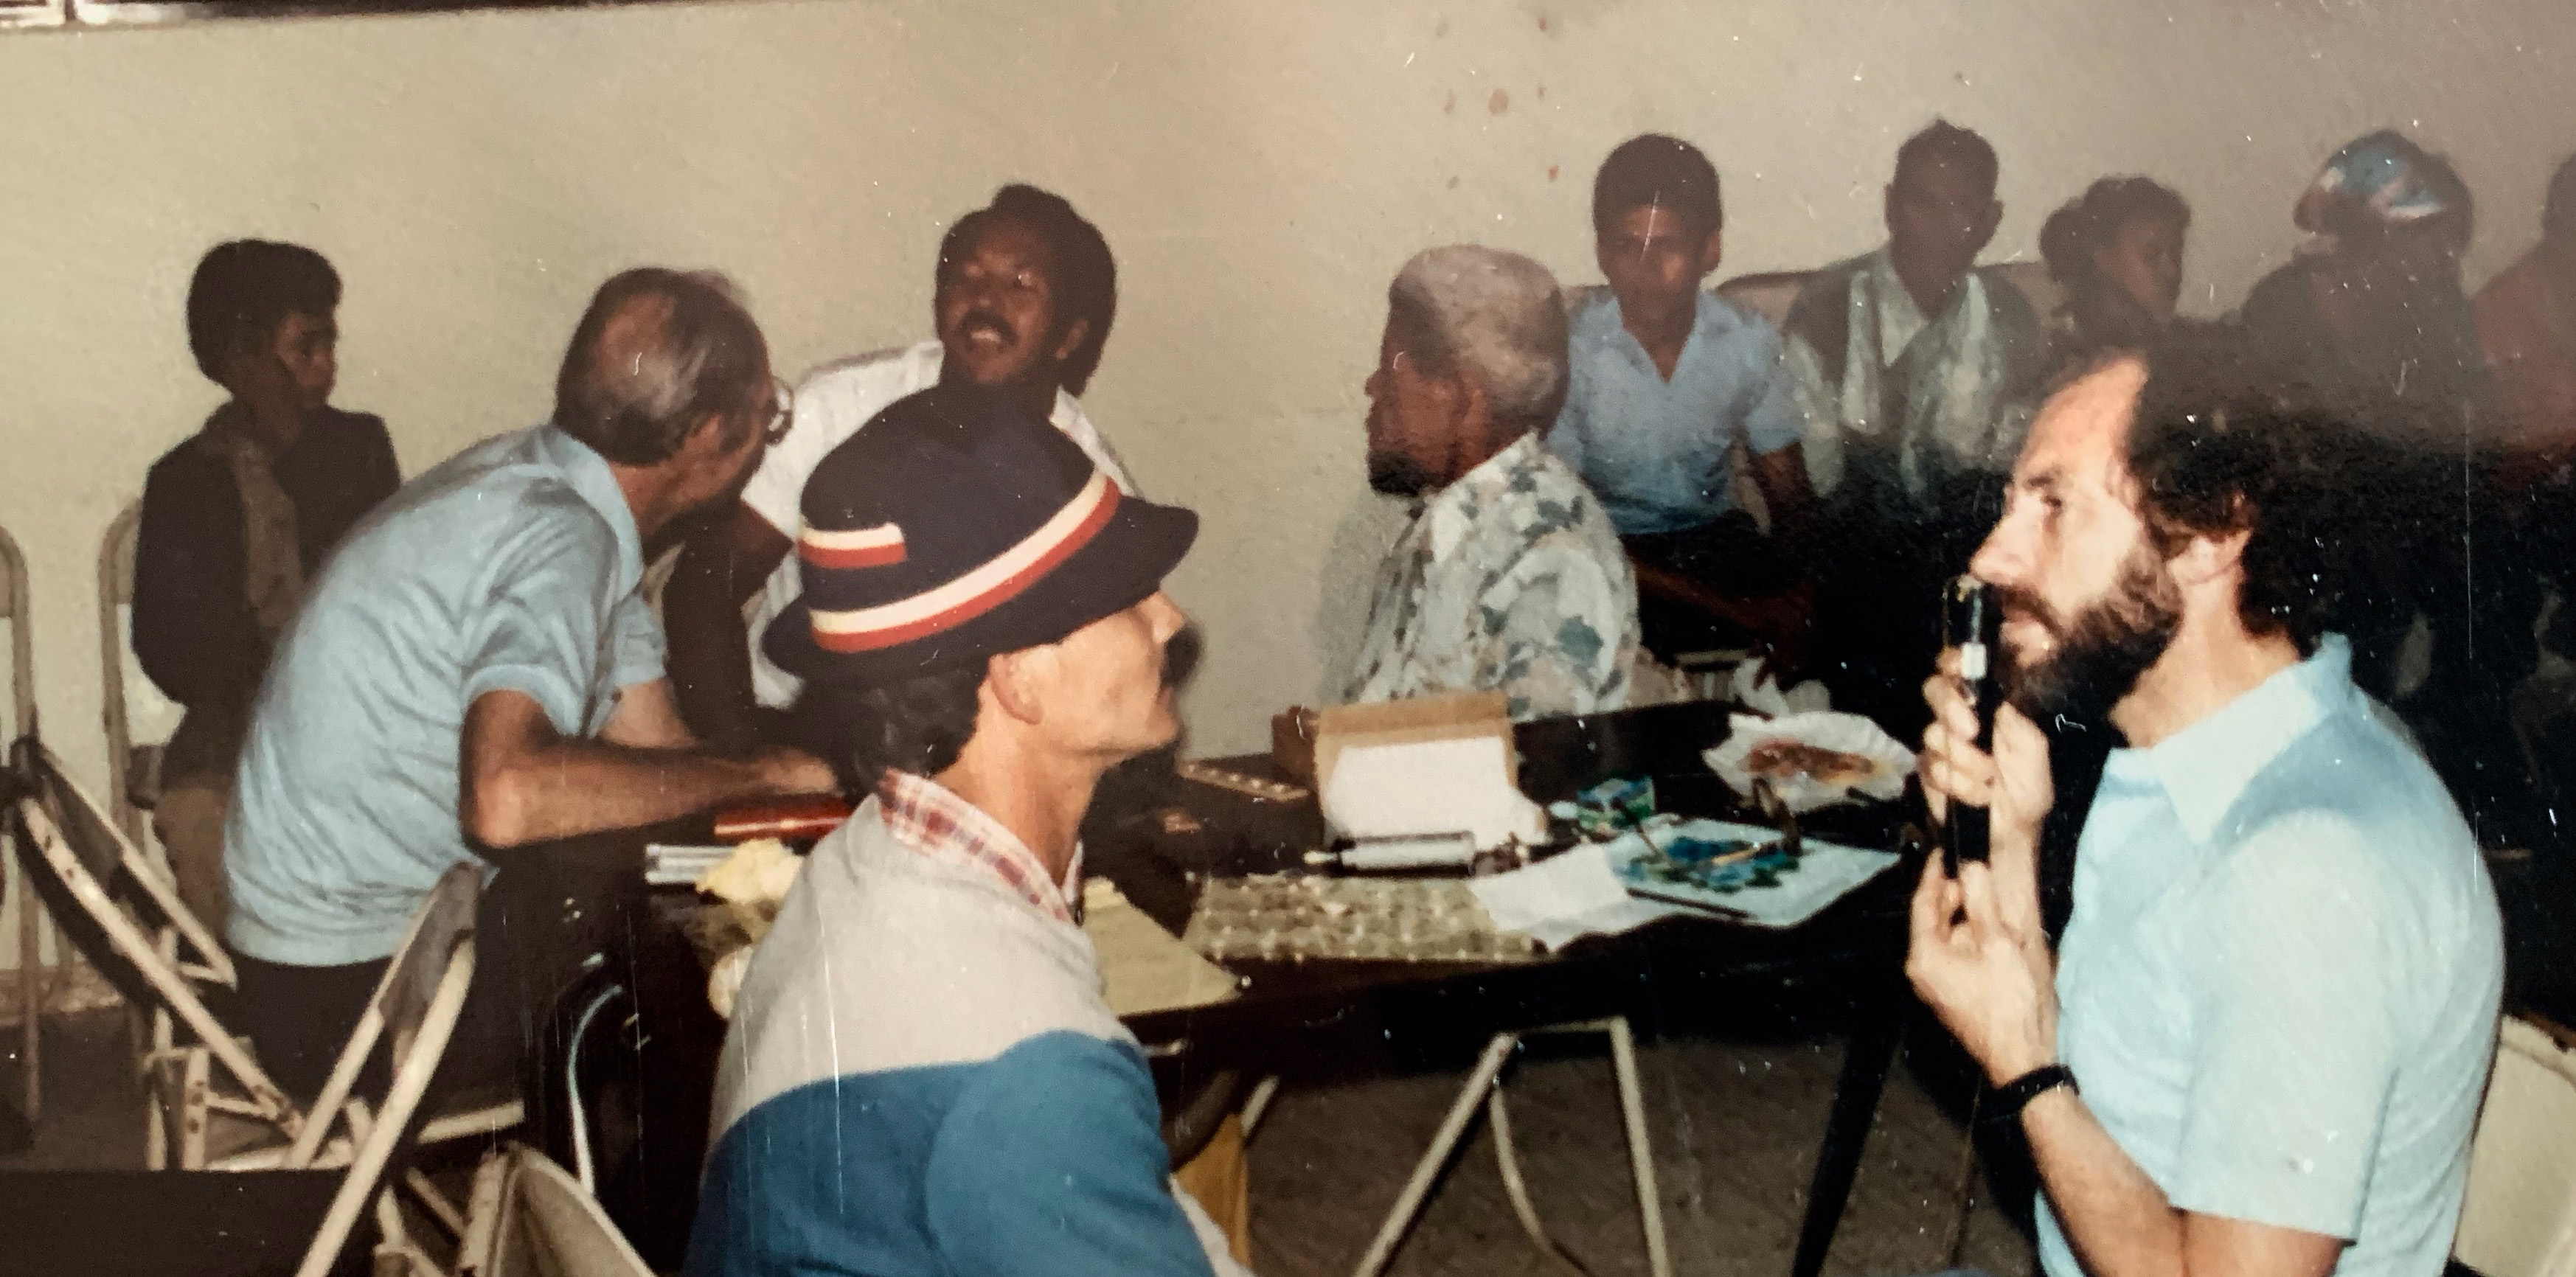 Lavaux volunteers his services at a free eyecare project in the Dominican Republic in 1983